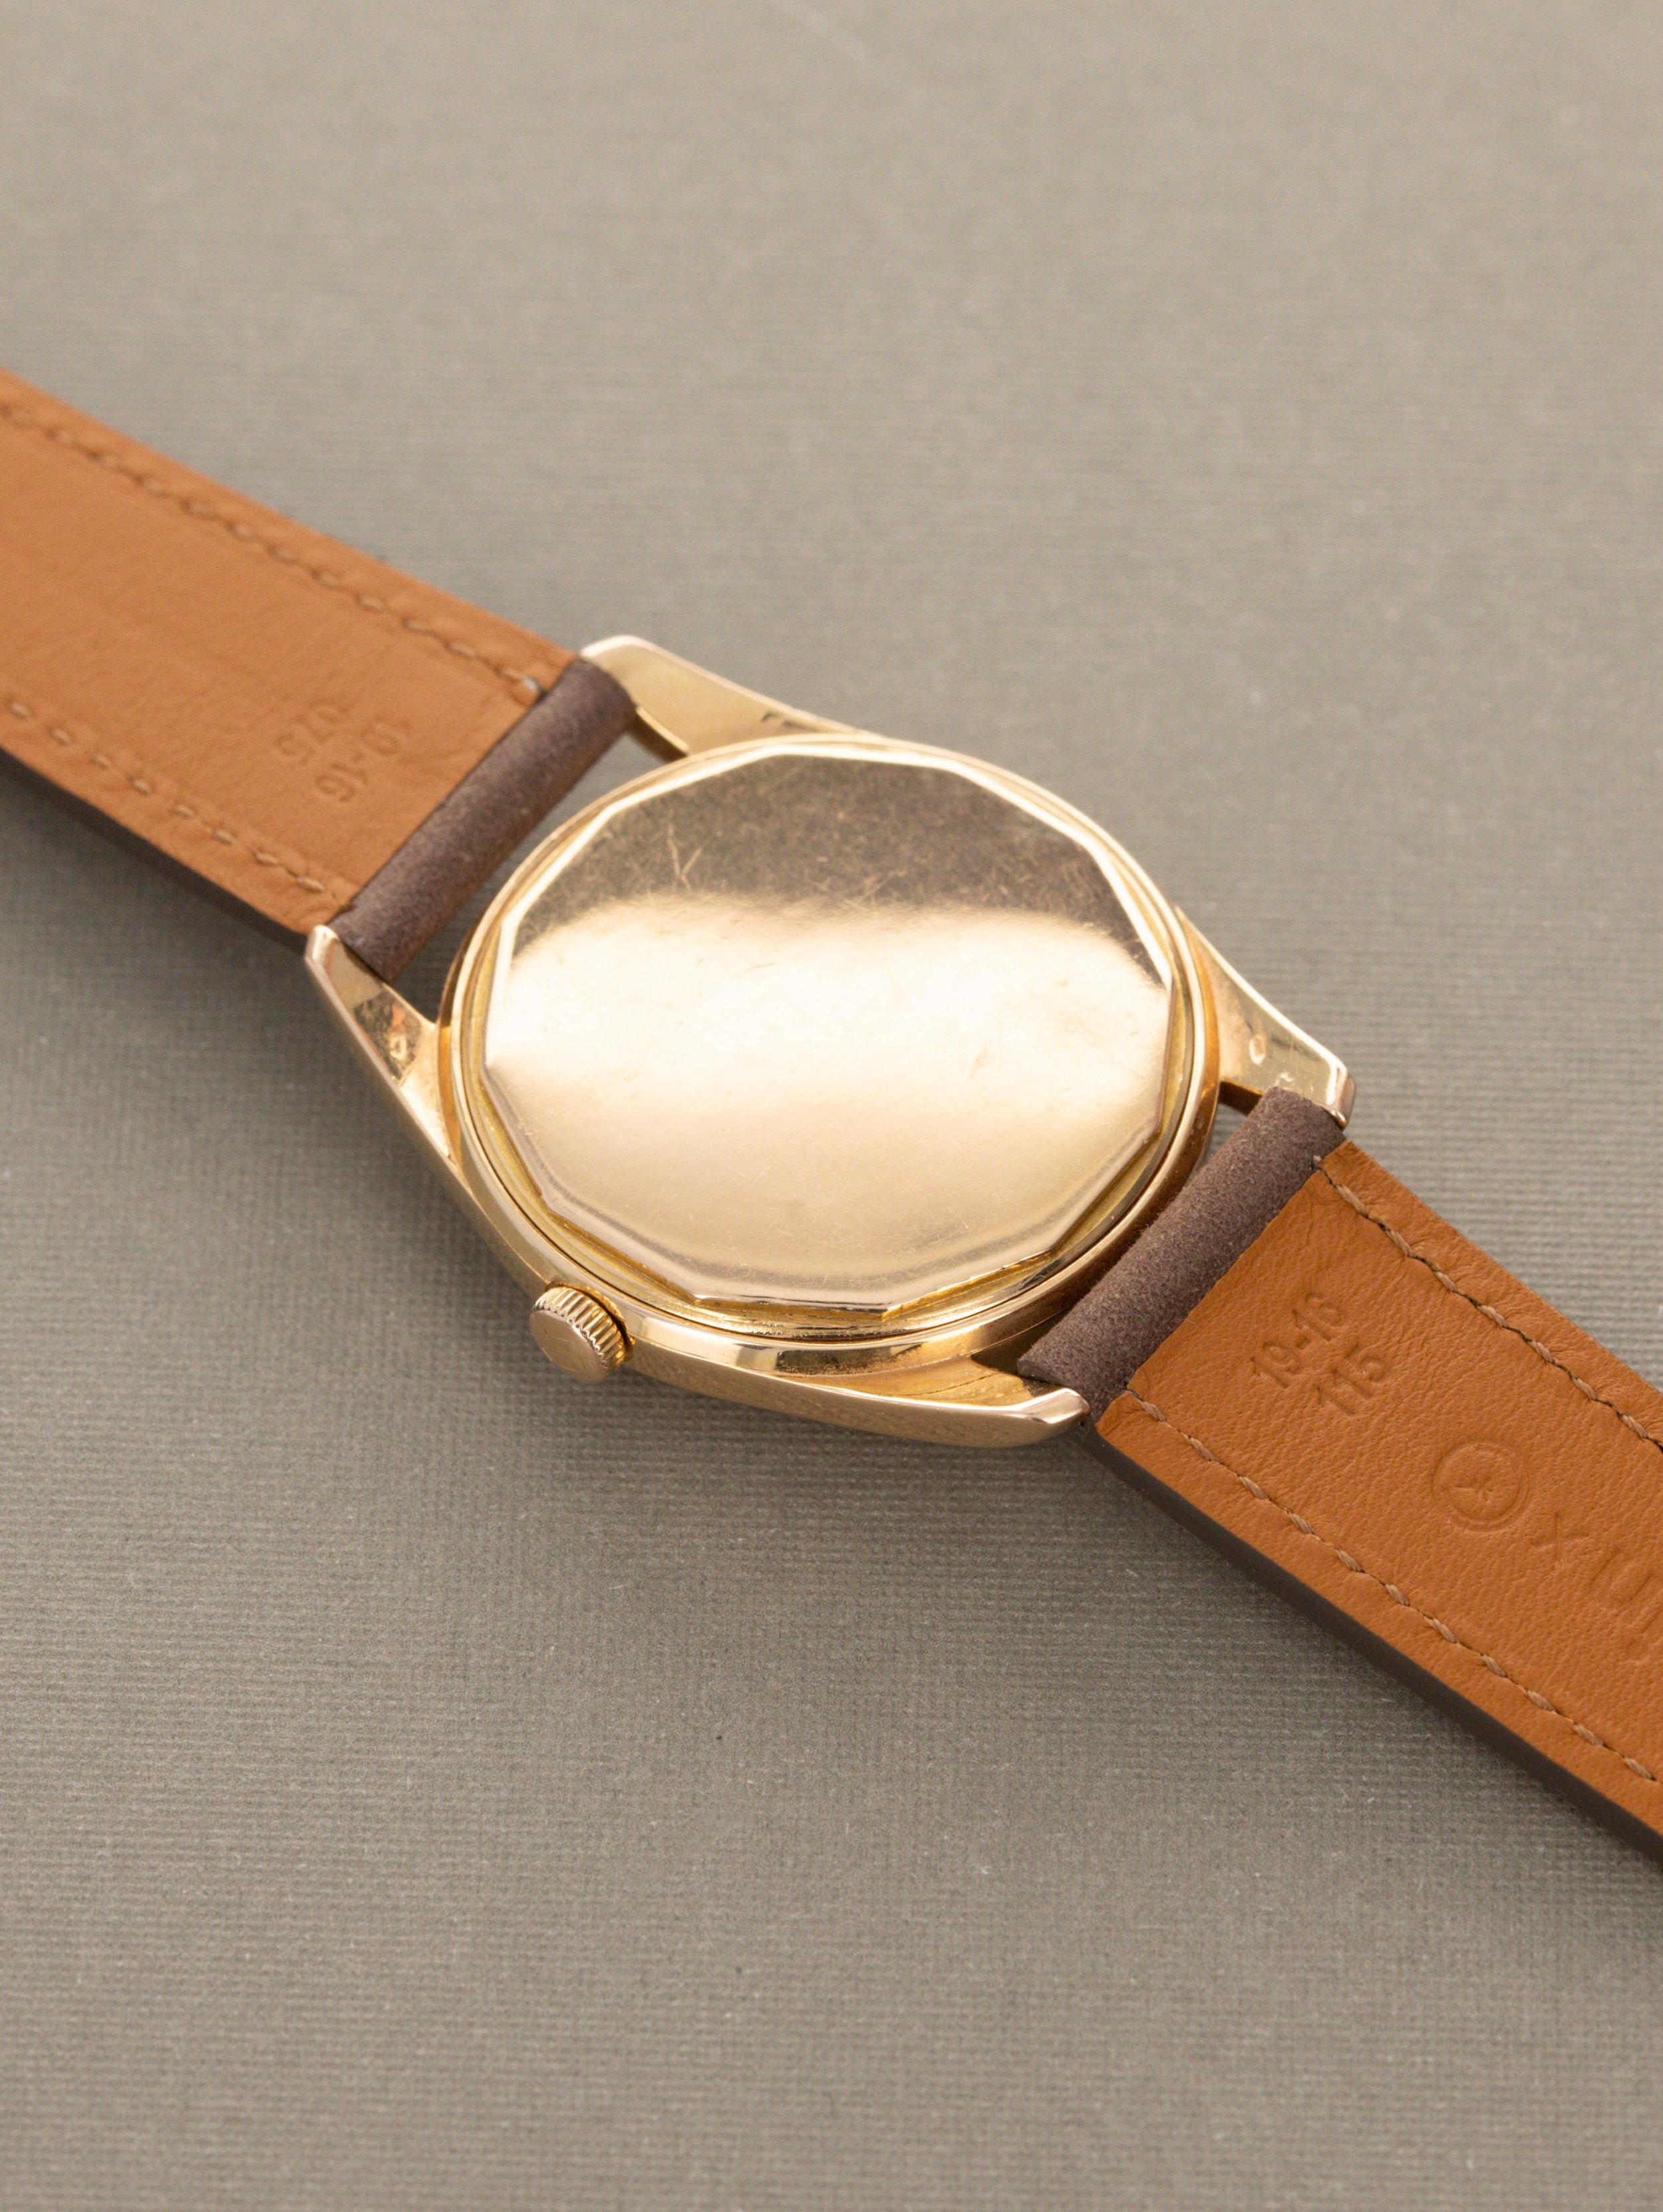 Universal Geneve Polerouter Date - Rose Gold